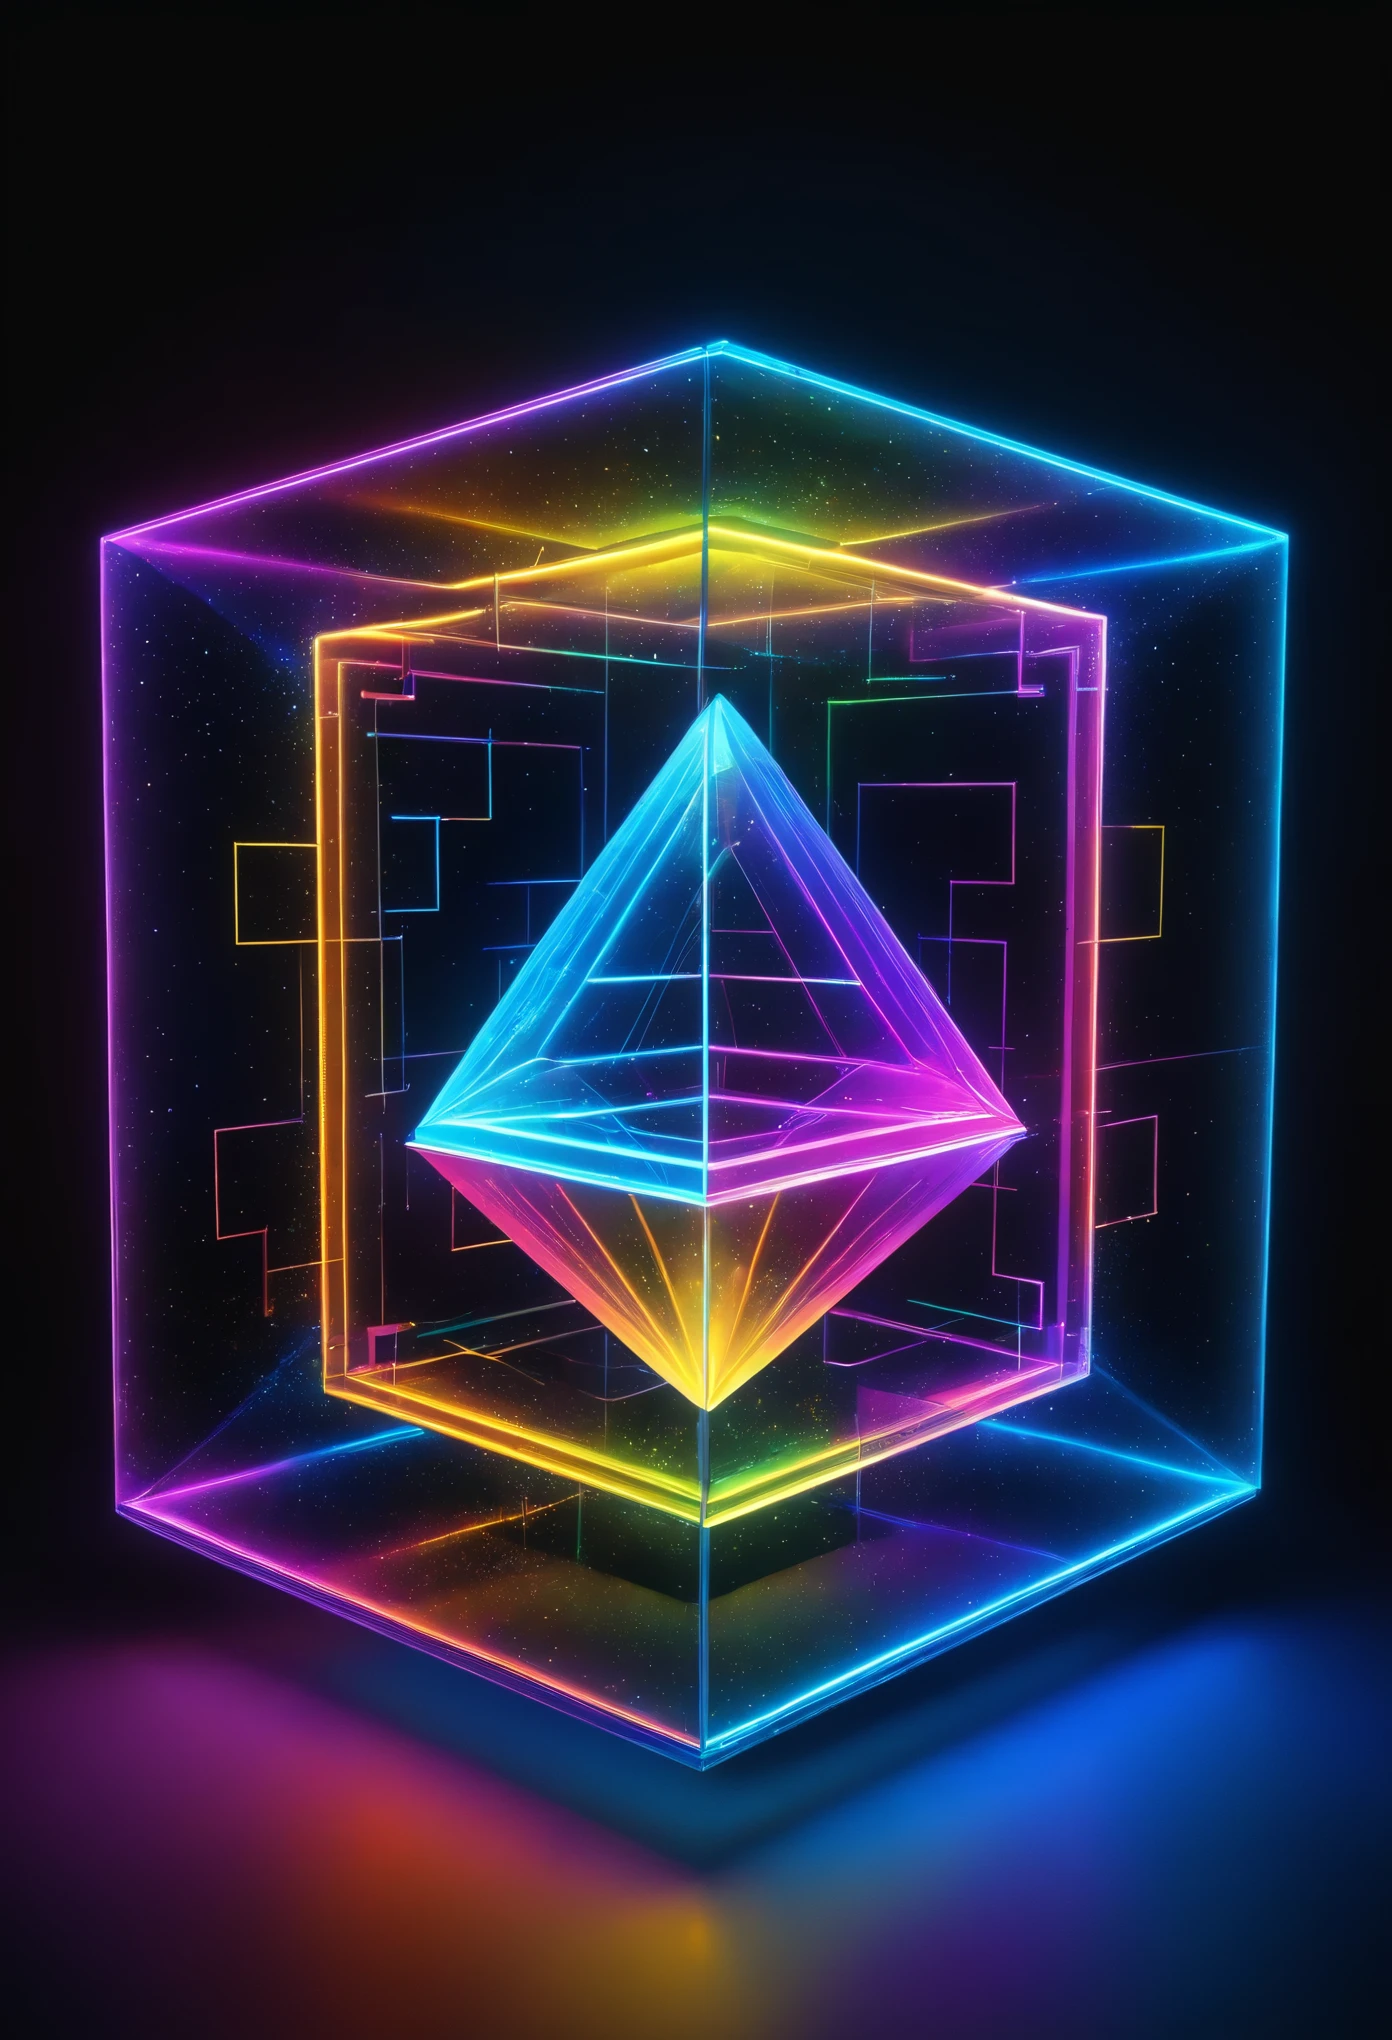 holography, draw in neon colors ((巨大なgeometryオブジェクト)): geometry: ((floating)), transparent, three dimensional, light, SF, Digital art, Digital, scientific, dark background: electronic circuit: draw in neon colors, 3D, masterpiece, Digital空間, energy, beautiful, masterpiece, 8K, light, become familiar with, lively, colorful, nice, beautiful, rich colors, beautiful Light Lines. magic effect, Sparkling, beautiful Light Grains,geometry模様,works of art,Consists of squares and triangles